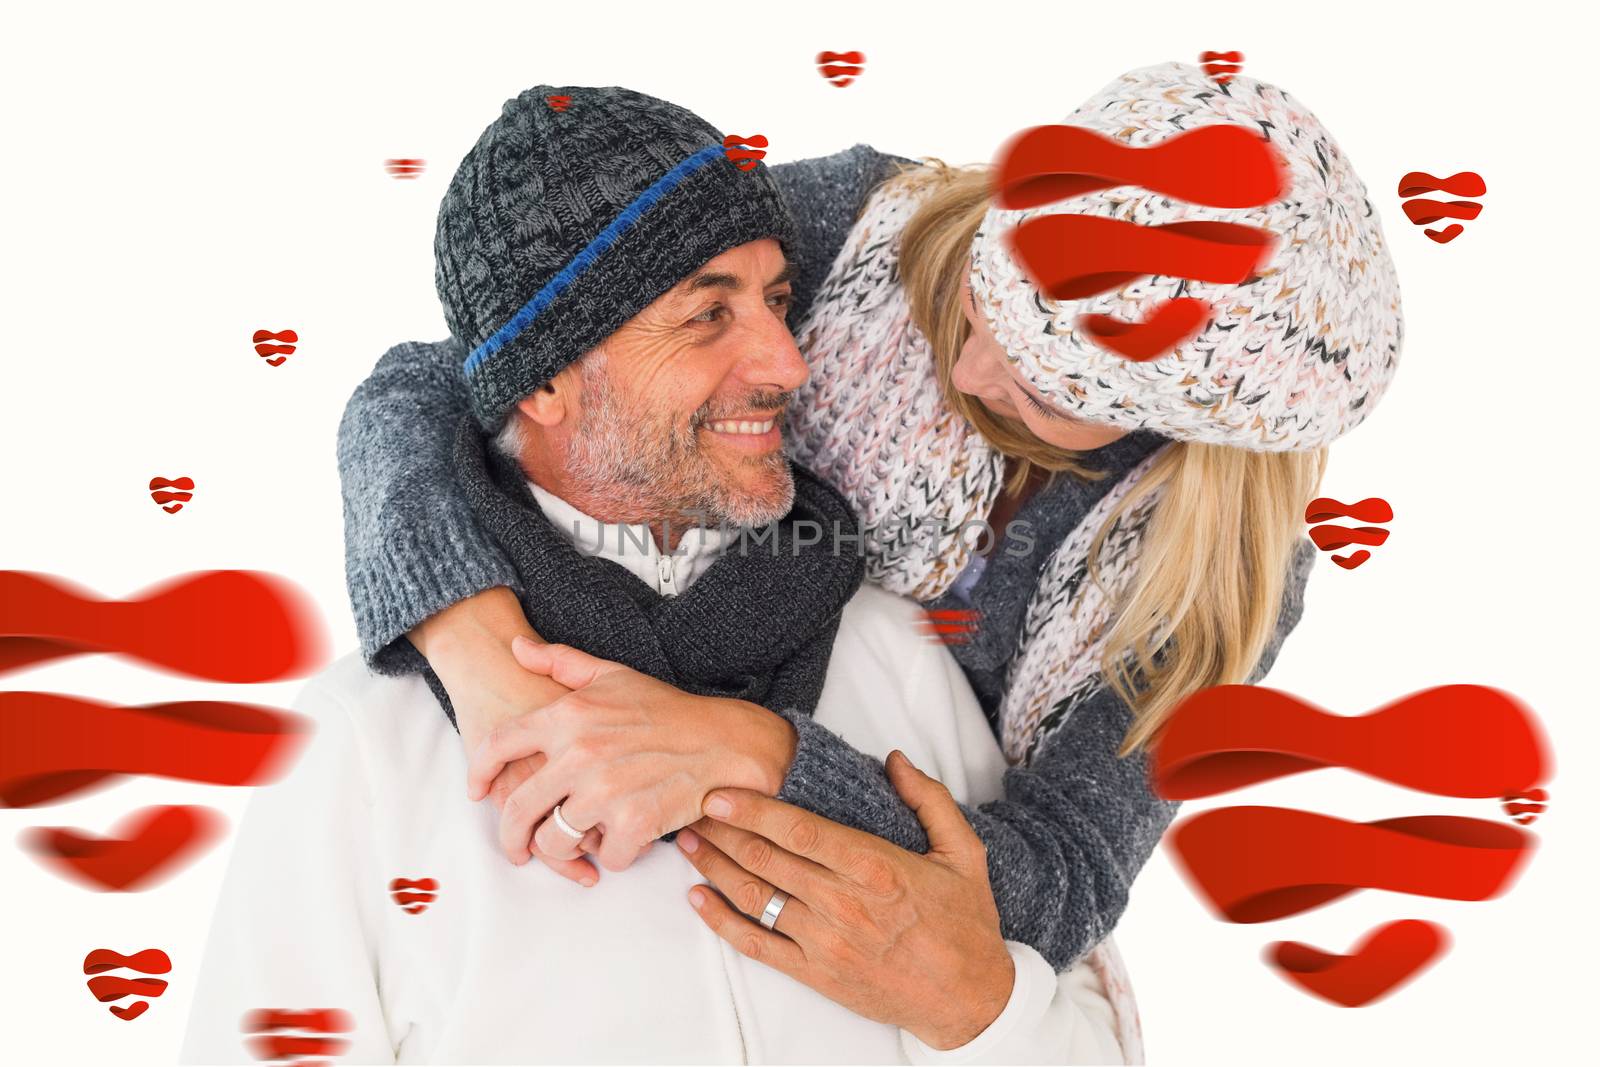 Happy couple in winter fashion embracing against hearts